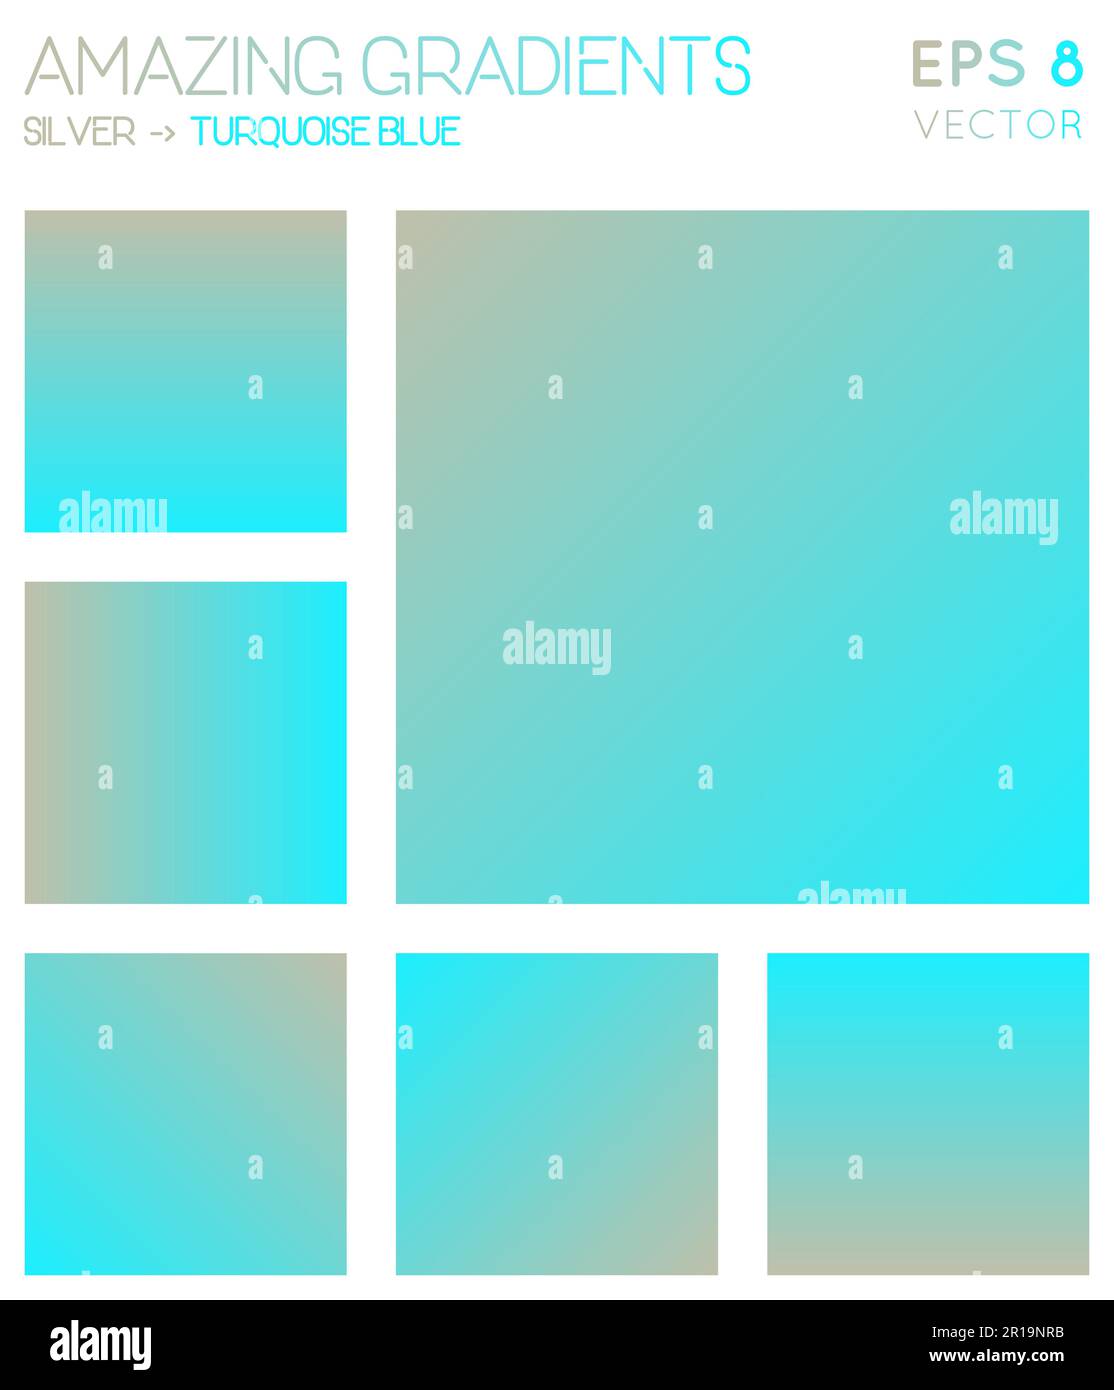 Colorful gradients in silver, turquoise blue color tones. Admirable ...